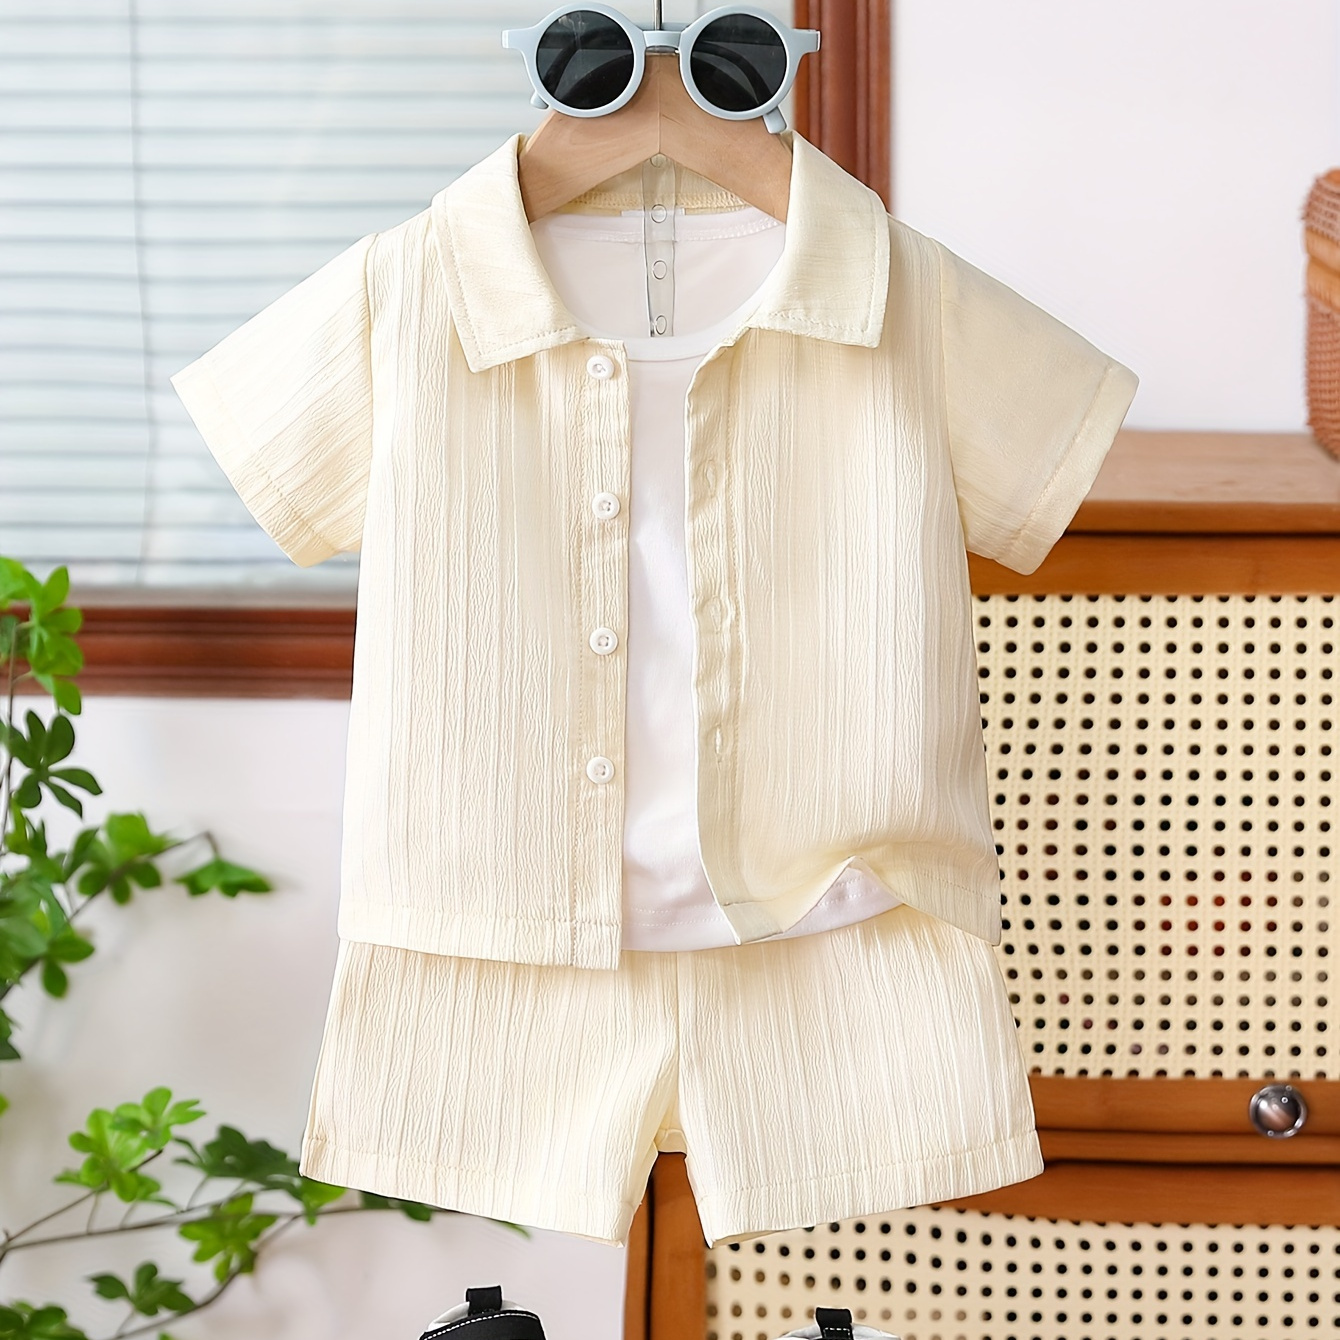 

2-piece Baby Boys Beige Casual Shirt Set, Summer Outfit With Short Sleeves And Shorts, Comfortable Kid's Clothing